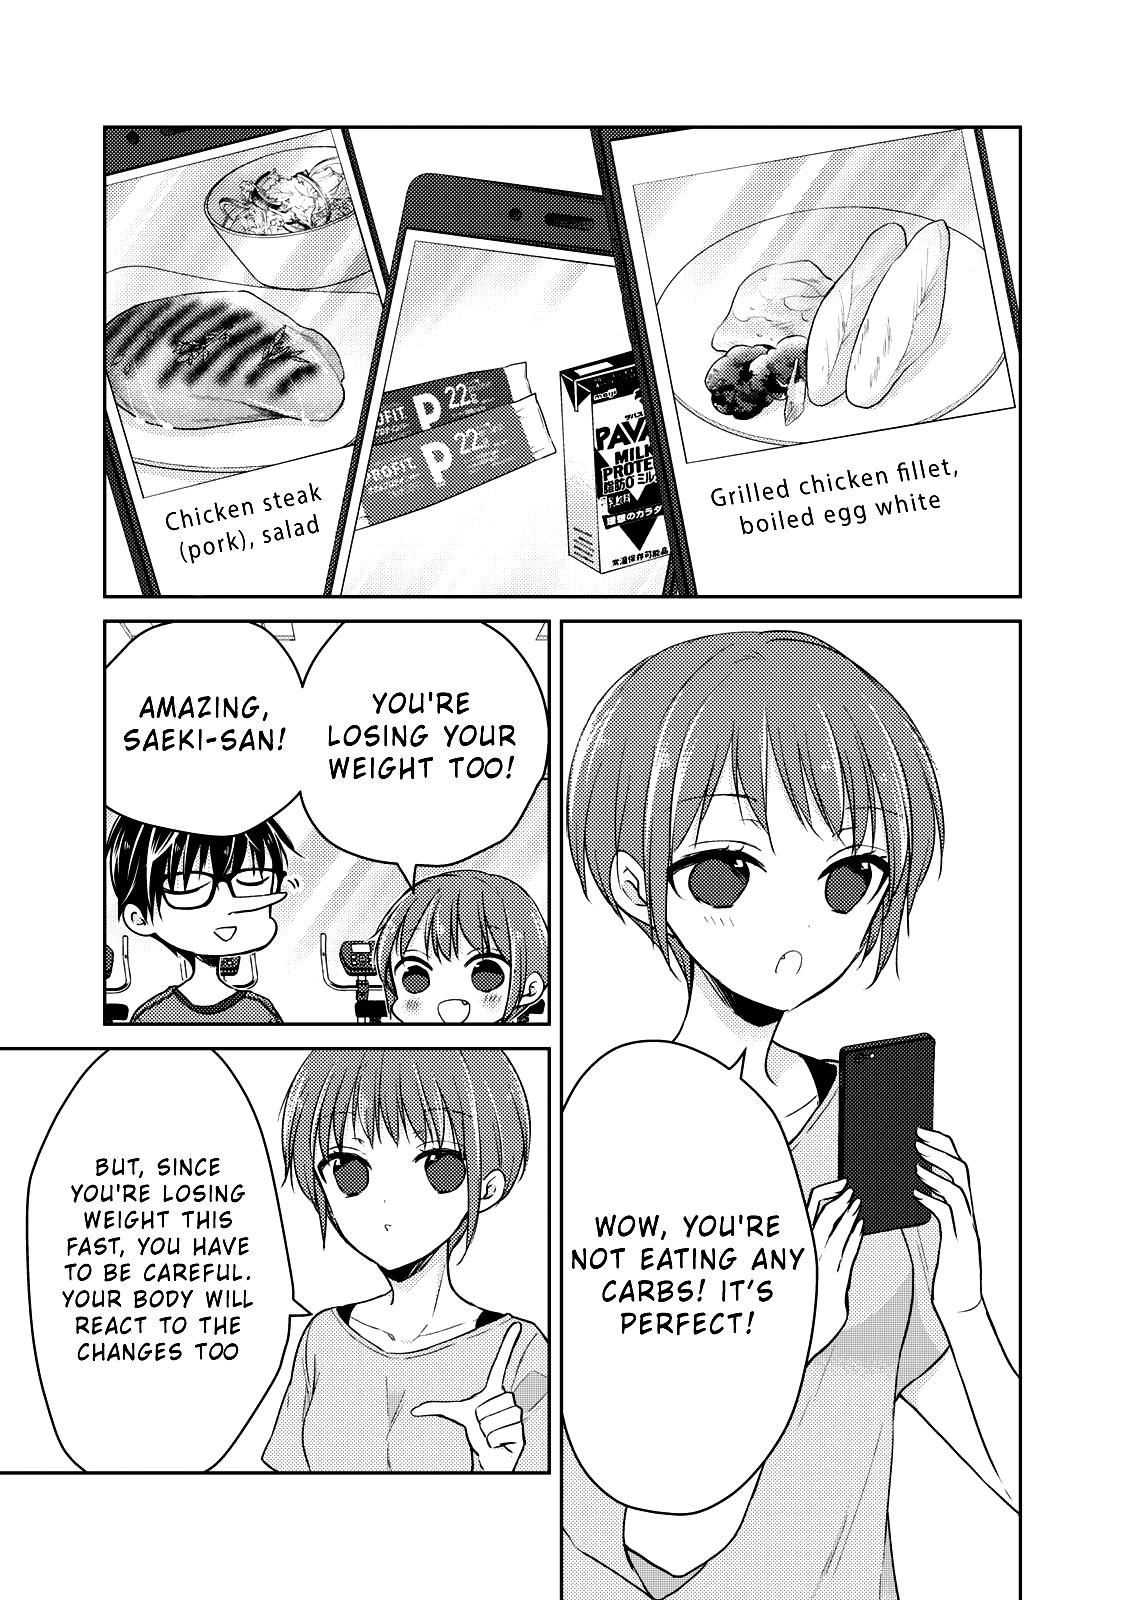 We May Be An Inexperienced Couple But... Vol. 5 Ch. 35 Charming Body